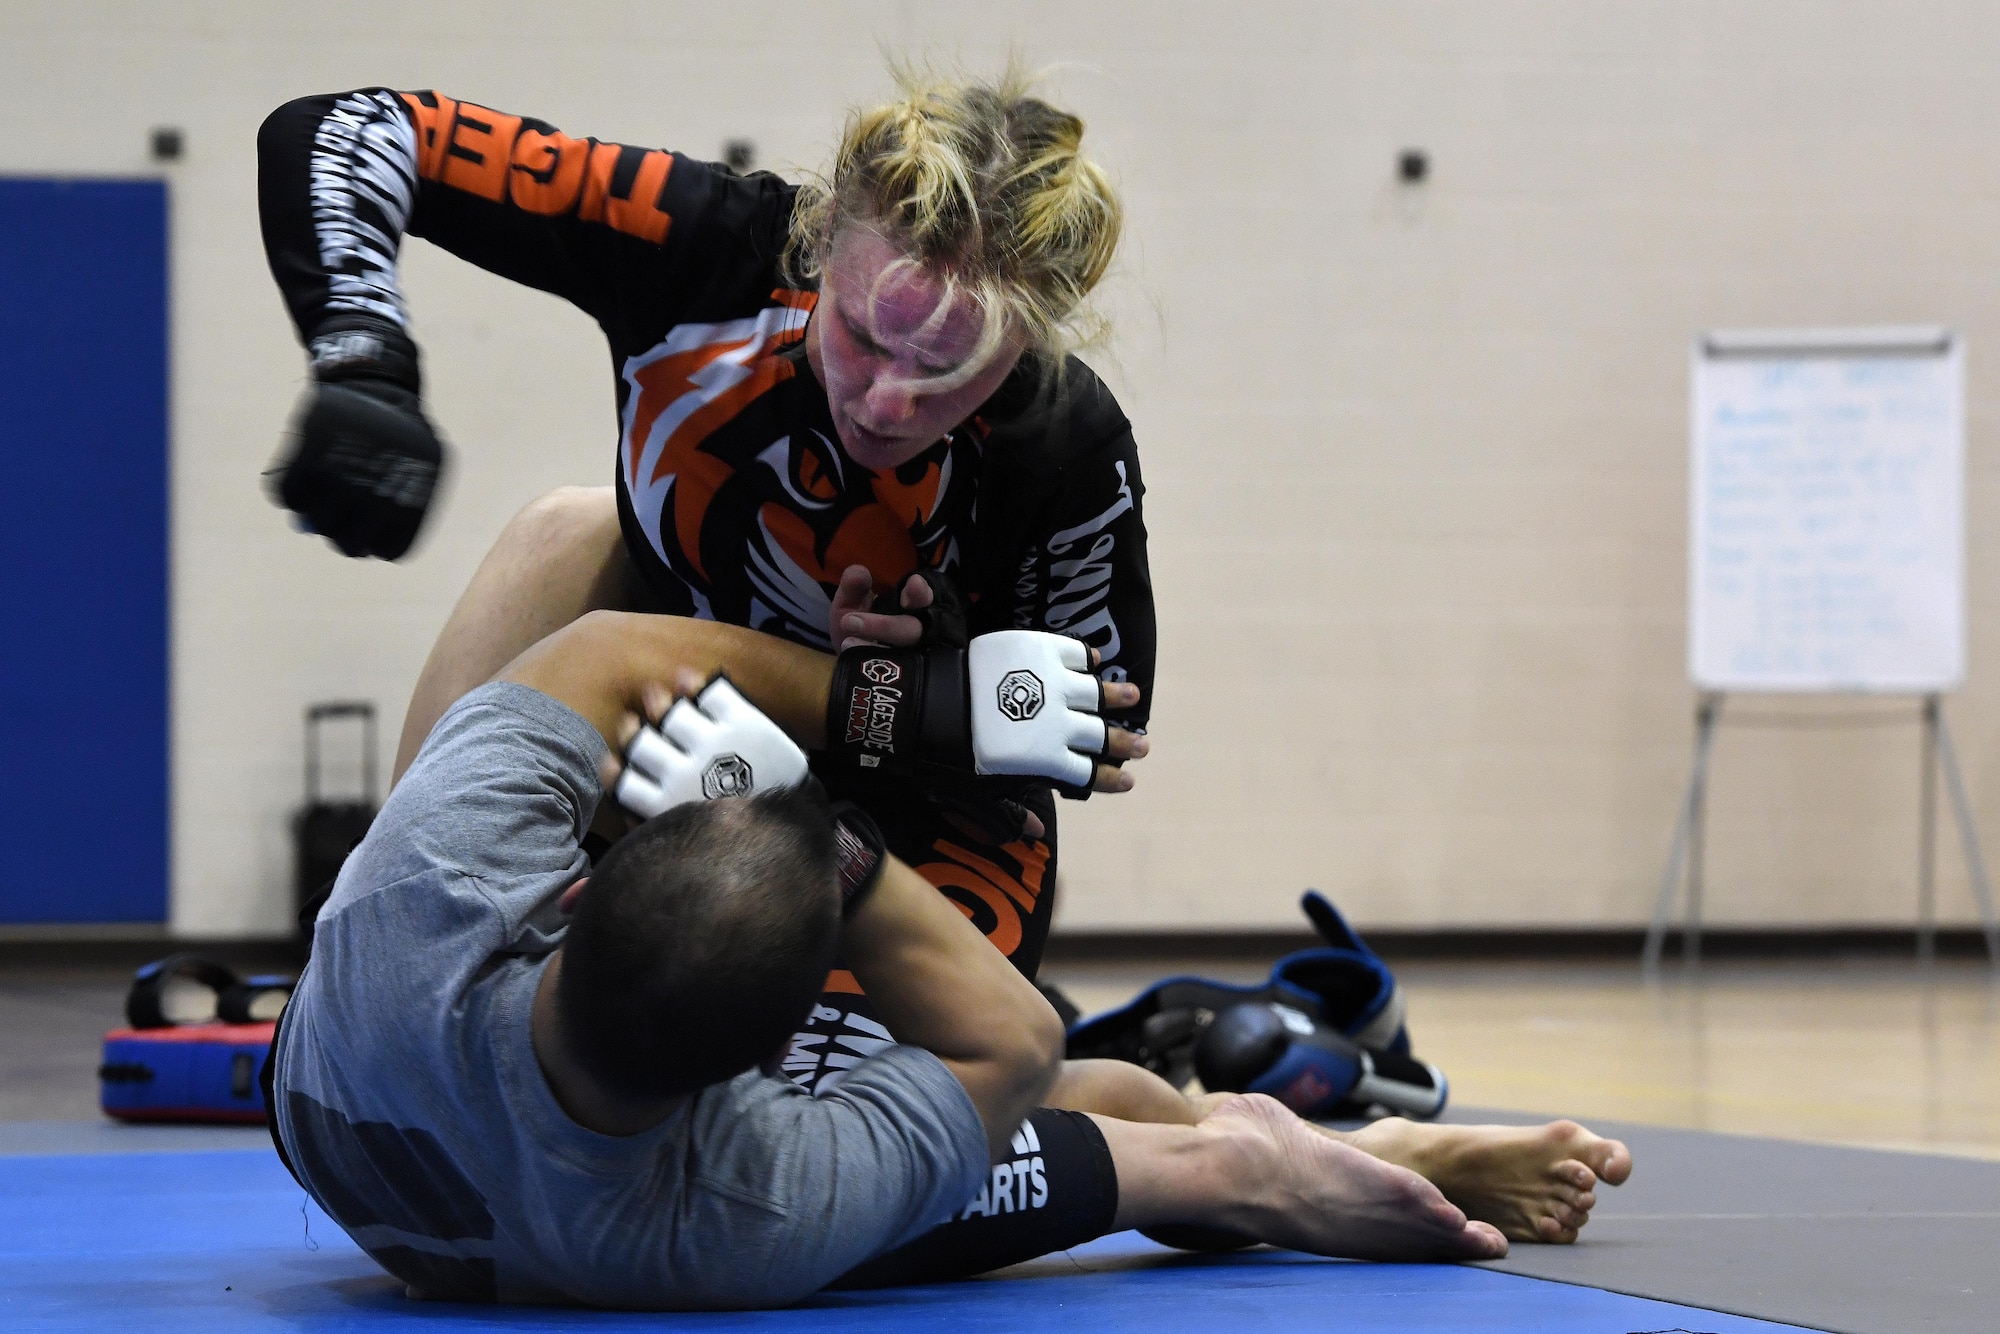 Valentina Shevchenko, Ultimate Fighting Championship mixed martial artist, spars with U.S. Army Sgt. Dale Addy, 128th Aviation Brigade at Joint Base Langley-Eustis, Va., Dec. 9, 2016. Shevchenko not only trained with service members, but also visited U.S. Army and U.S. Air Force units throughout the week as part of a military appreciation visit. She is also a professional kickboxer from Kyrgyzstan, who began her professional career when she was 12 years old, when she knocked out a 22-year-old opponent, earning the nickname “Bullet.” (U.S. Air Force photo by Staff Sgt. Nick Wilson)